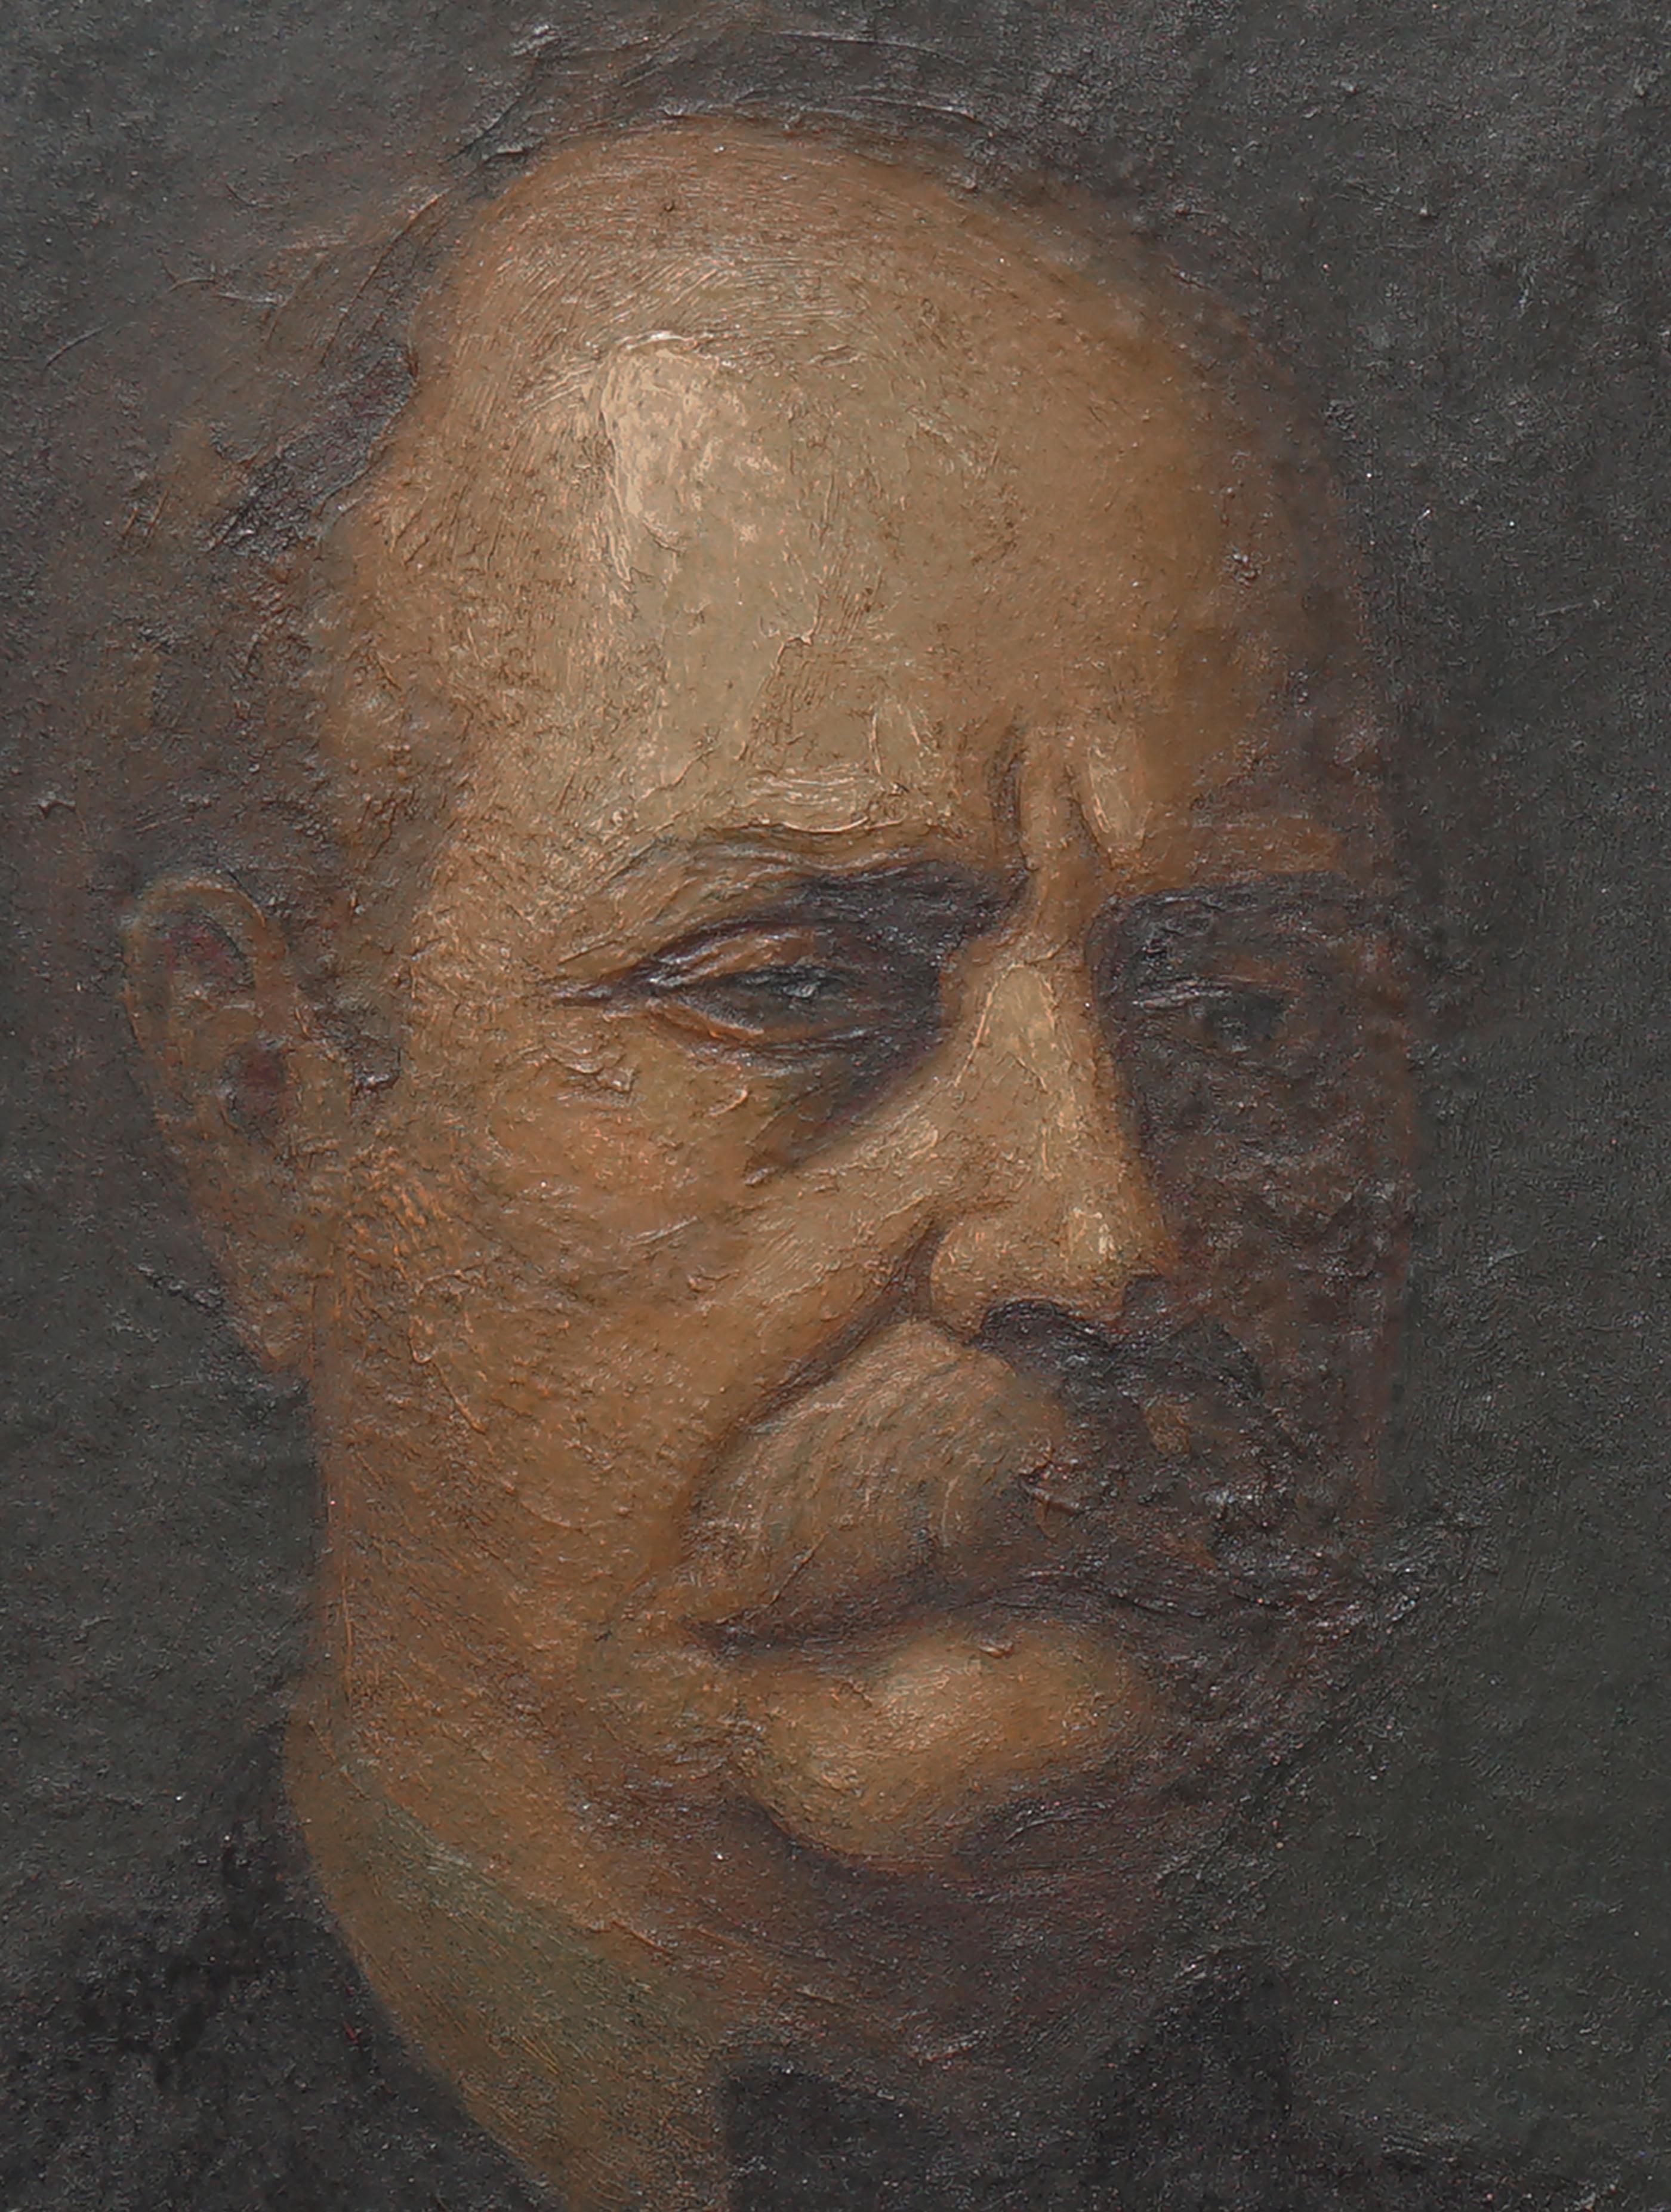 Compelling portrait of older man by Claude Buck (American, 1890-1974), likely dating to the 1920s. Signed lower left corner 